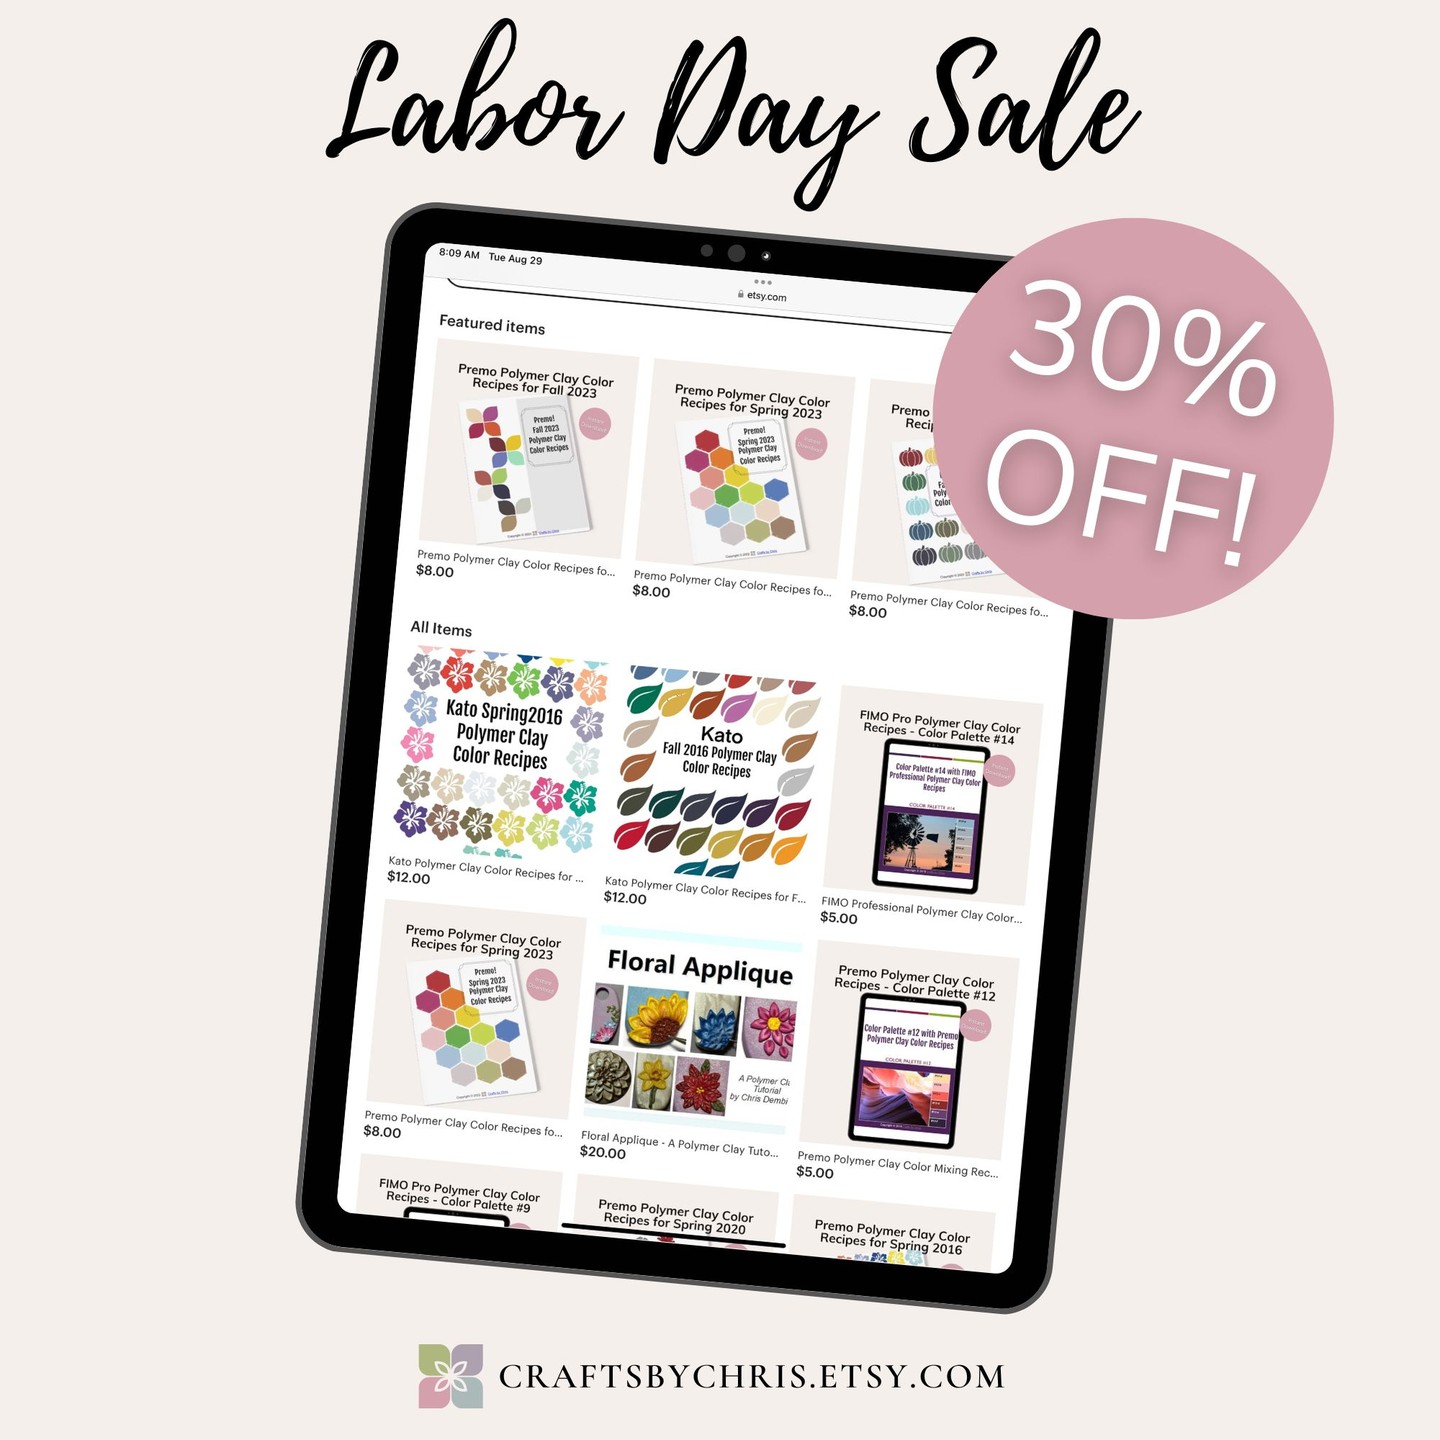 Time for my annual Labor Day Sale! Save 30% now through Monday, September 4th.

#polymerclay #polymerclayart #polymercla